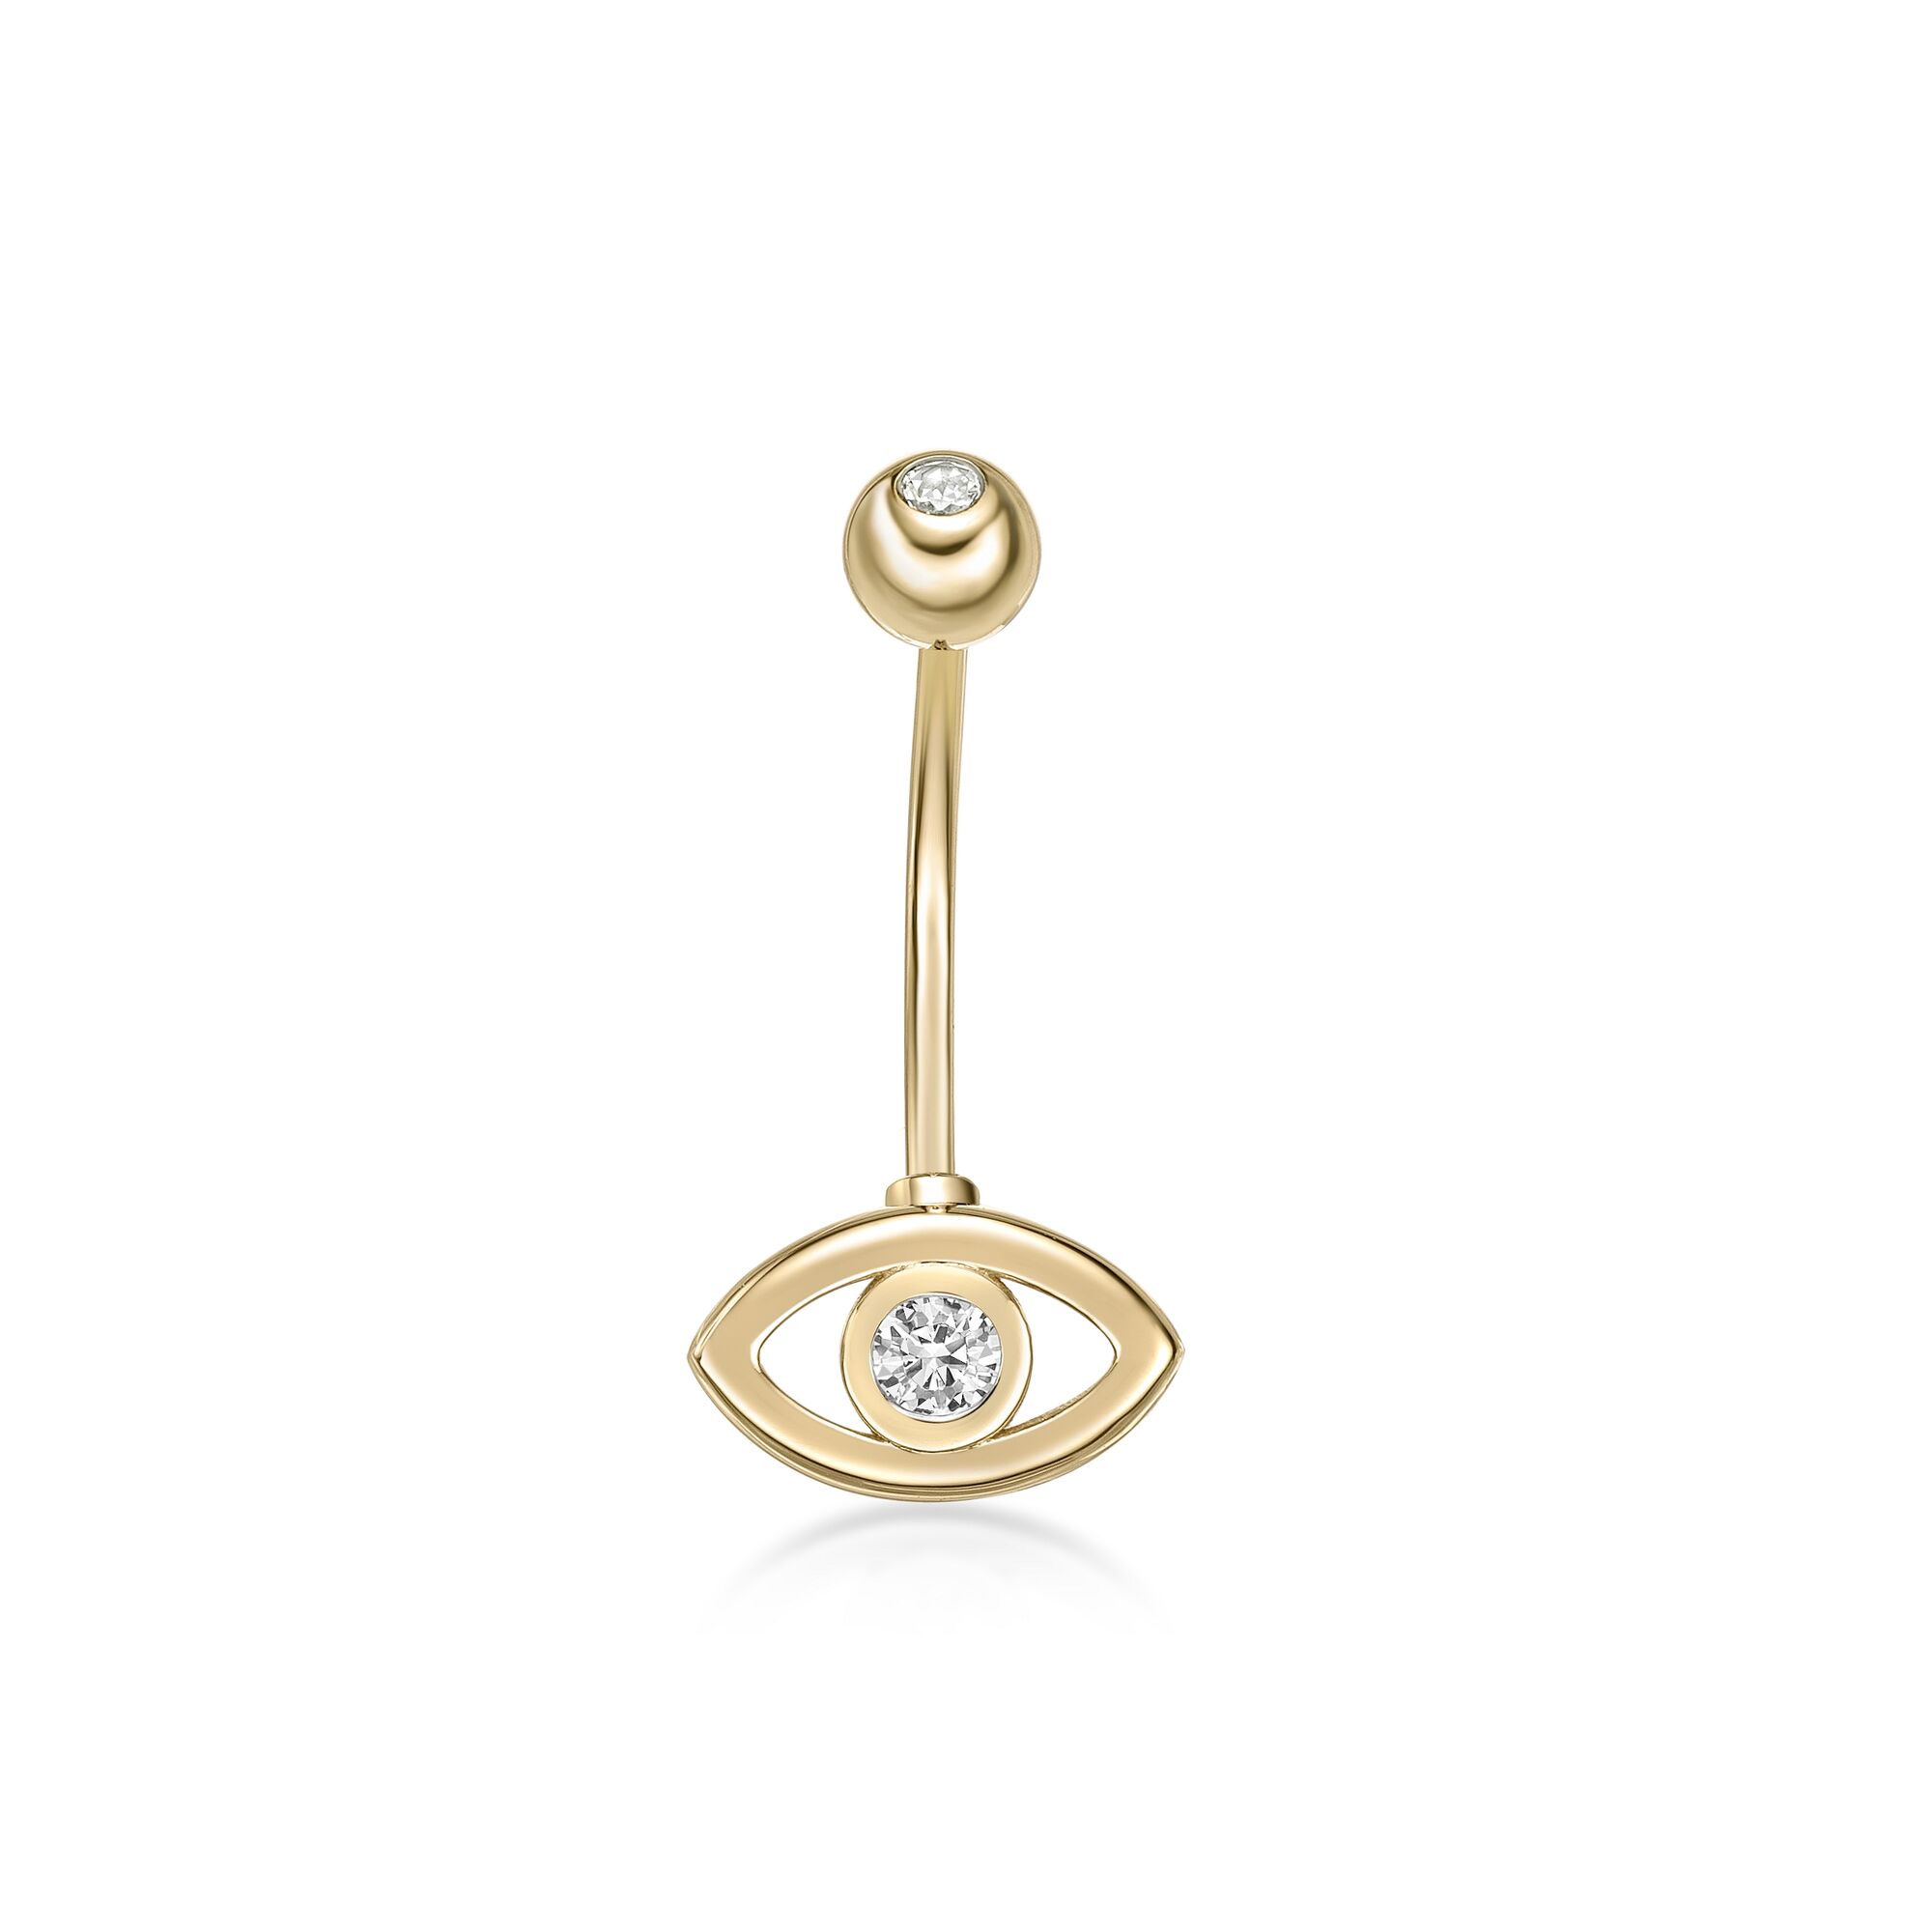 52535-belly-ring-default-collection-yellow-gold-52535.jpg